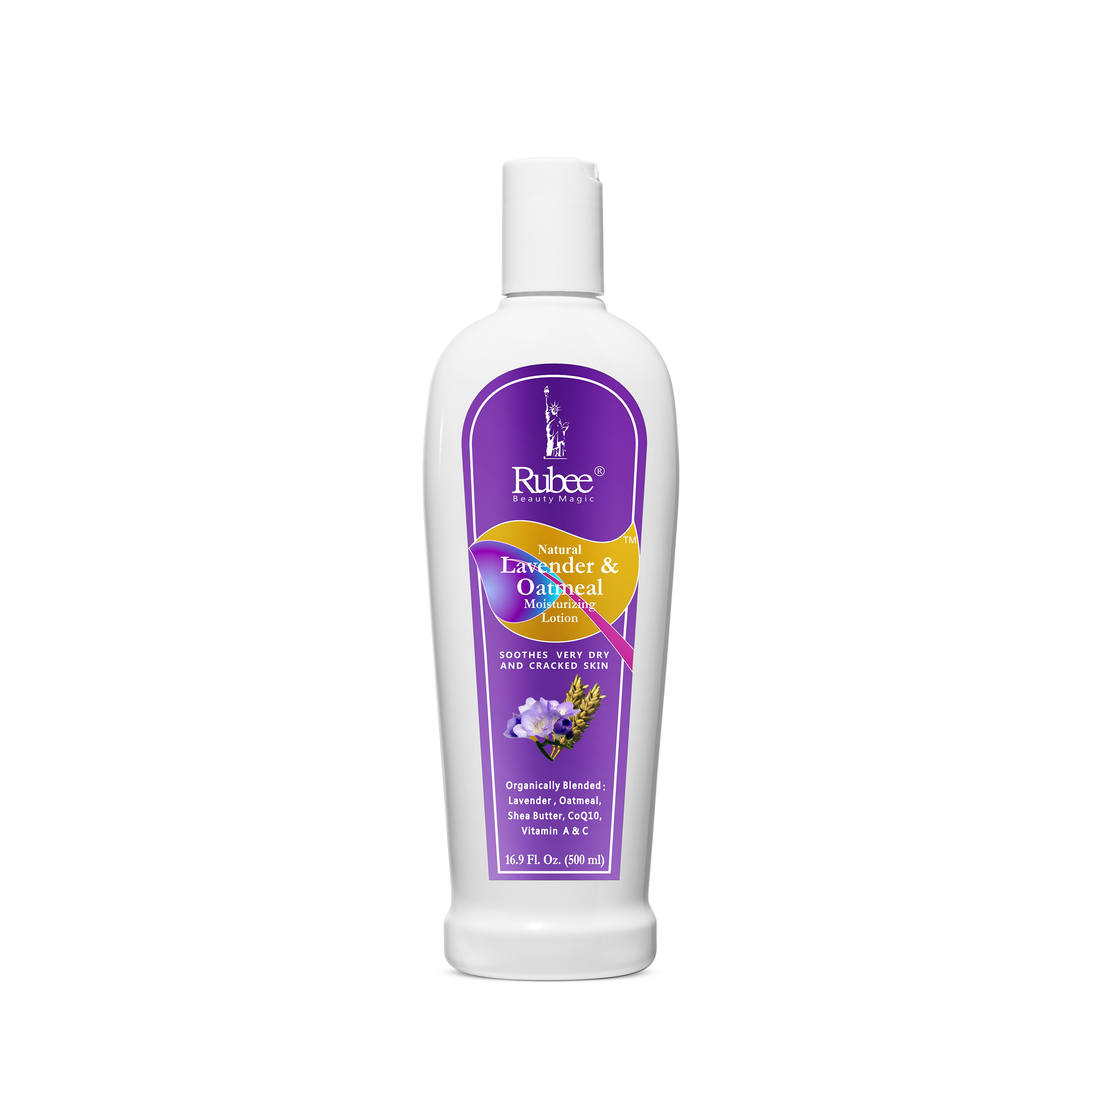 Rubee Natural Lavender and Oatmeal Moisturizing Lotion